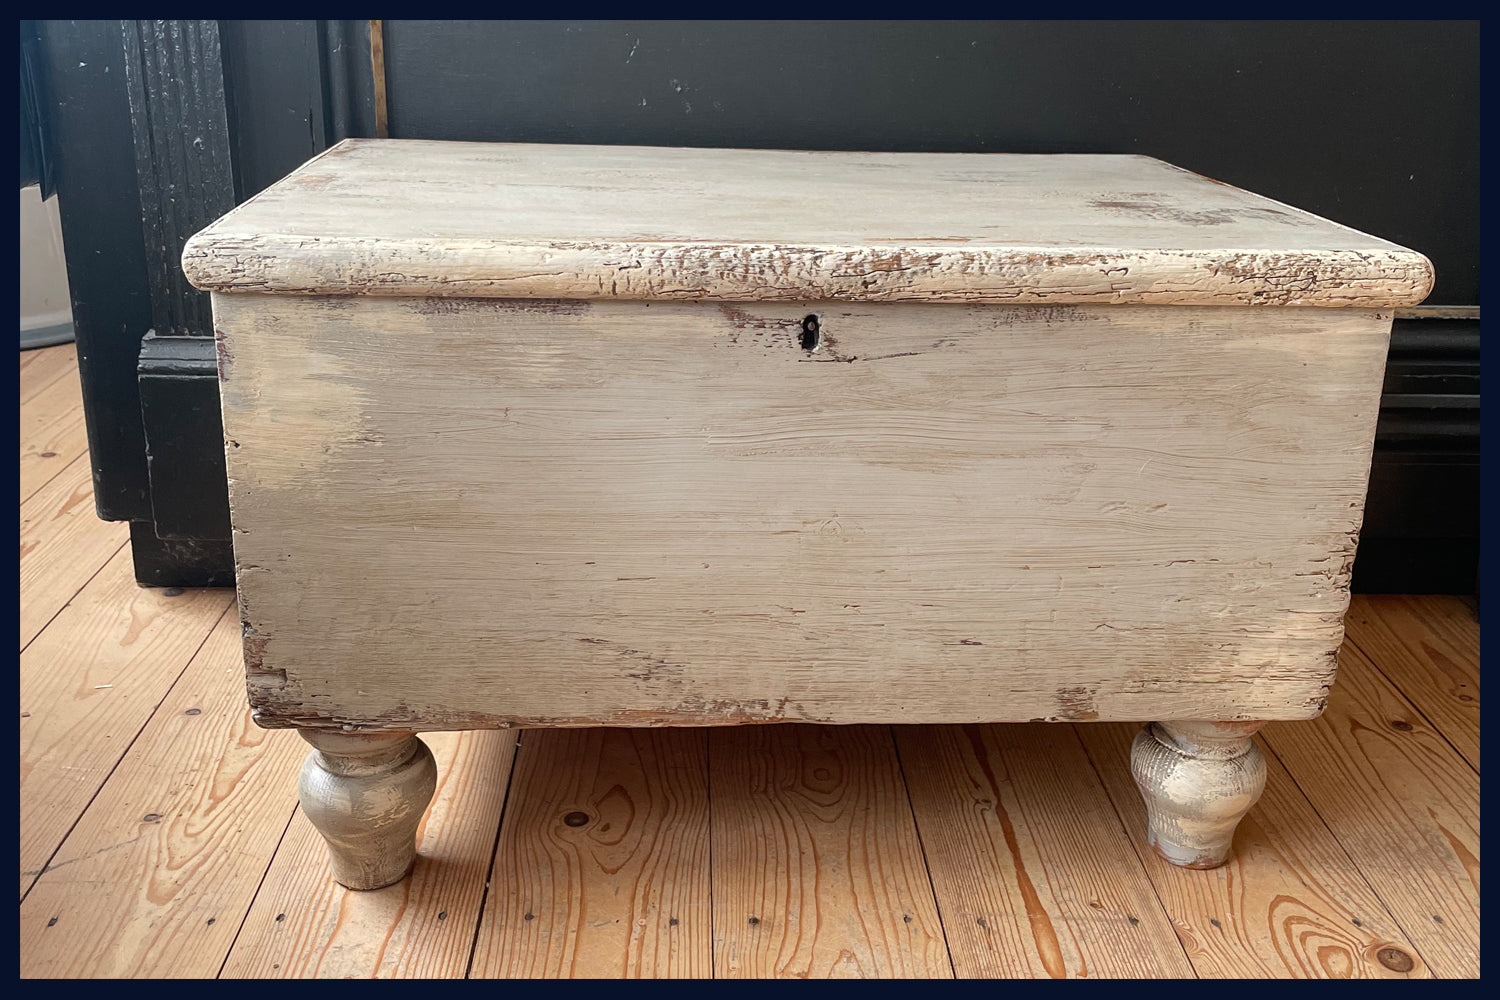 Wonderland Furniture Collection: Antique Painted Pine Wooden Box Storage Table